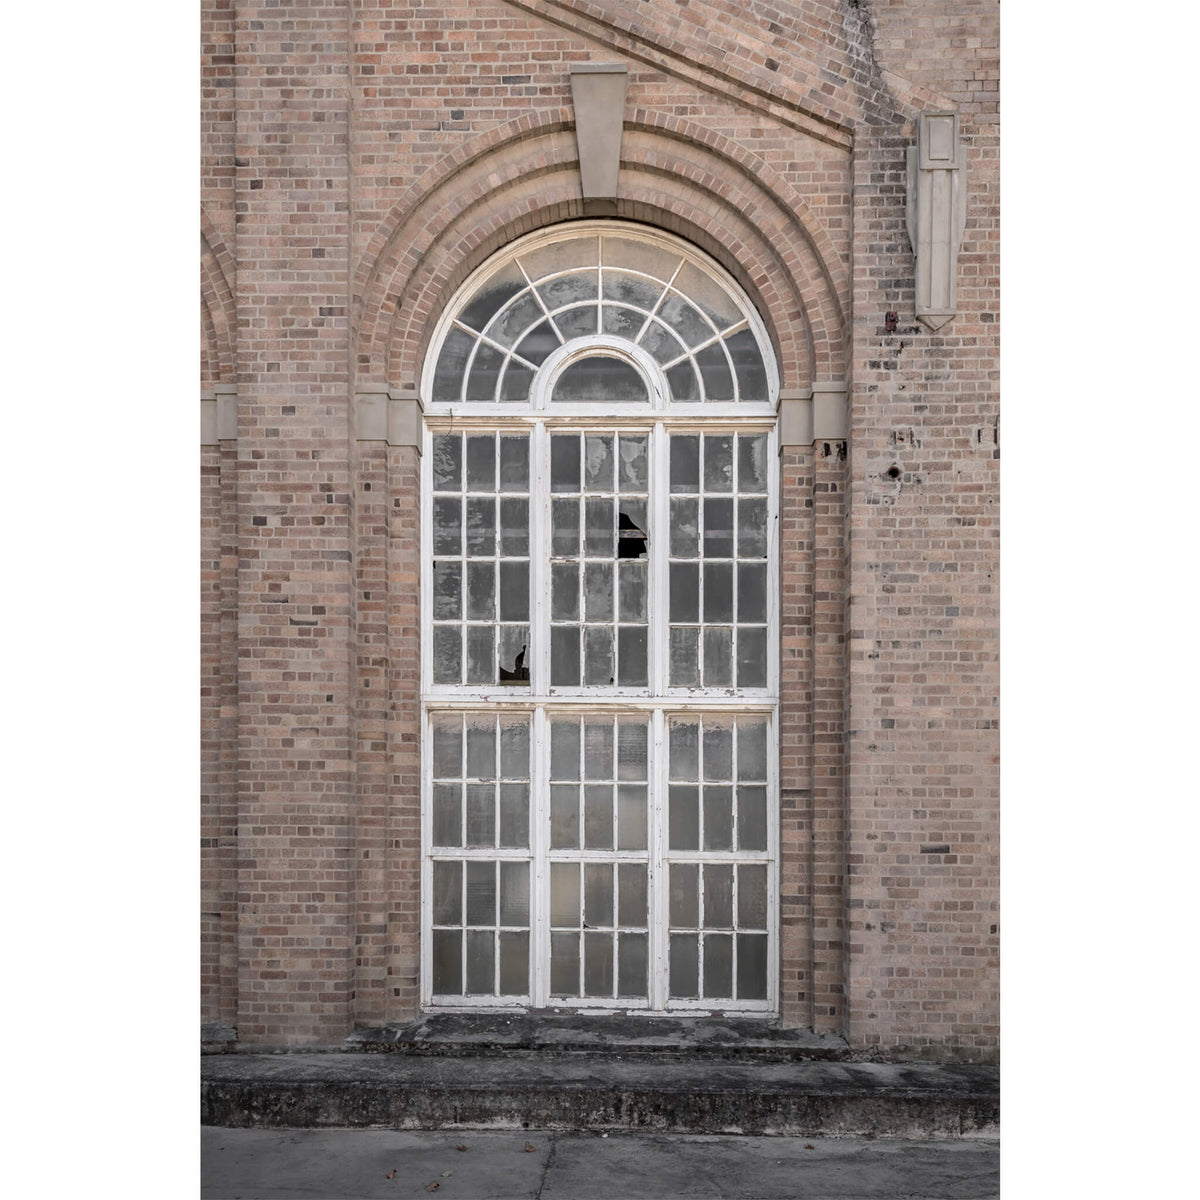 Arched Window | Portland Cement Works